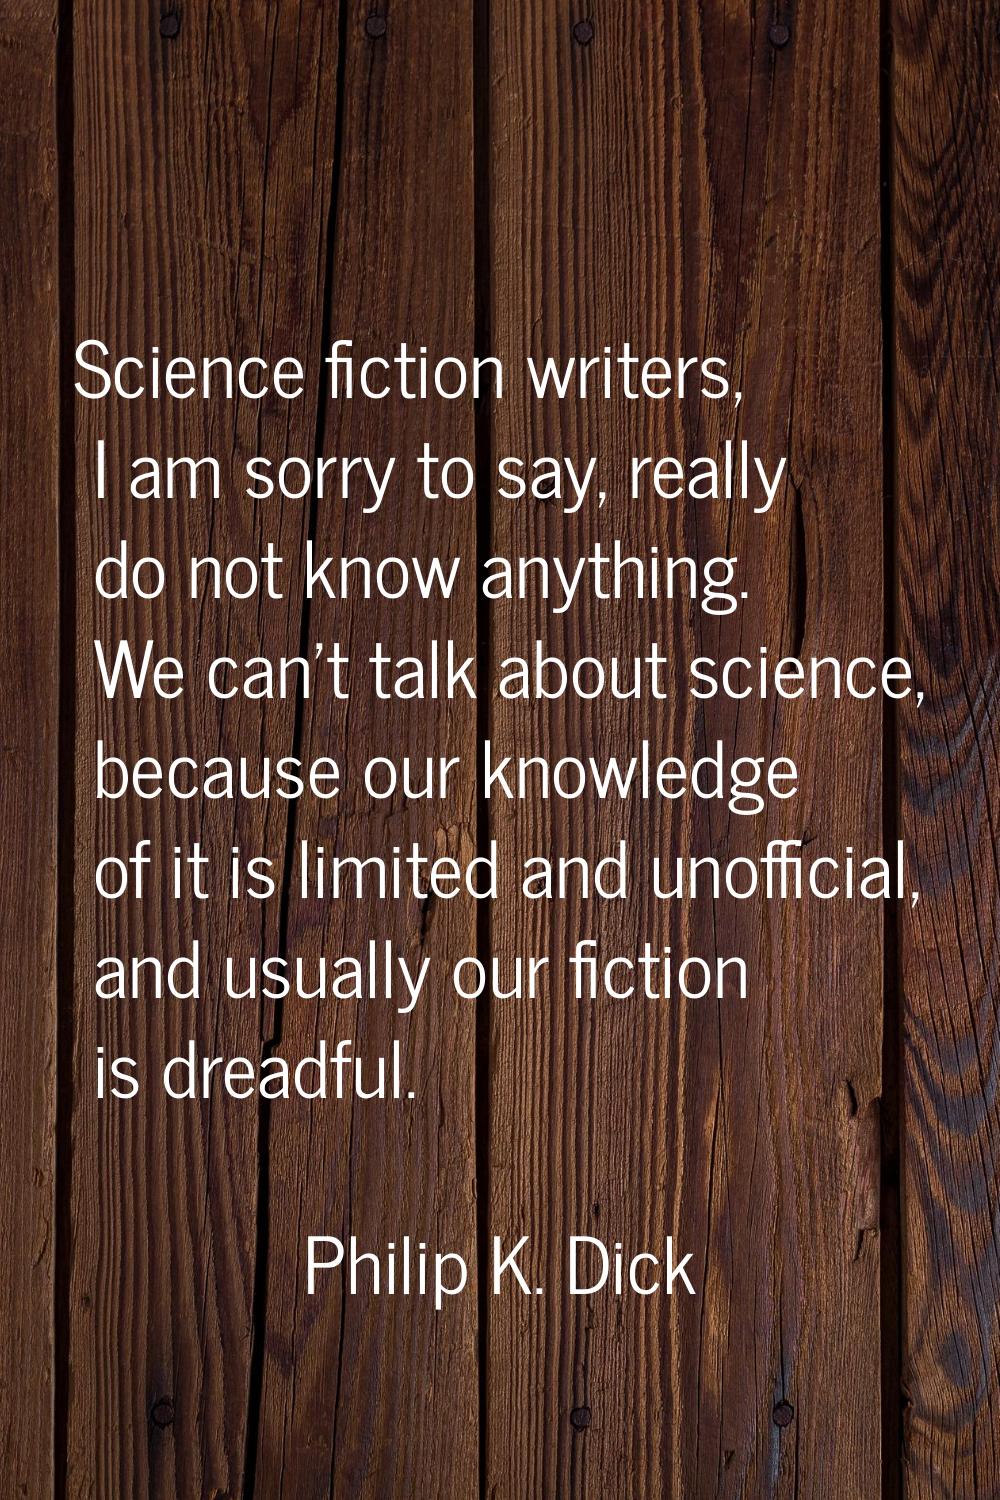 Science fiction writers, I am sorry to say, really do not know anything. We can't talk about scienc